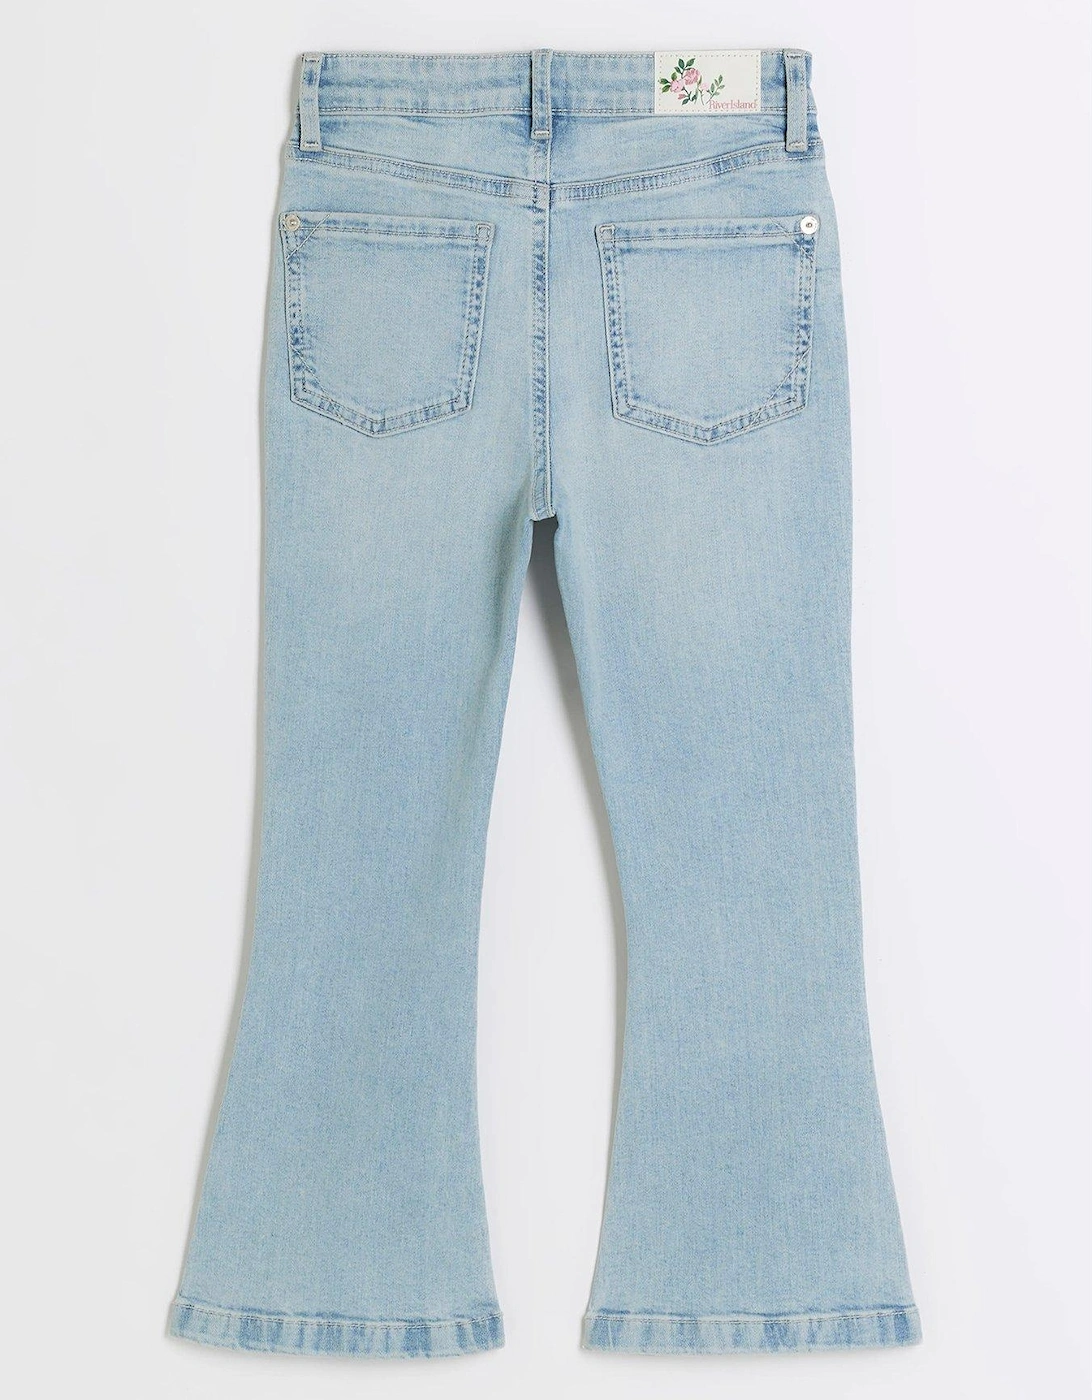 Girls Flared Jeans - Blue